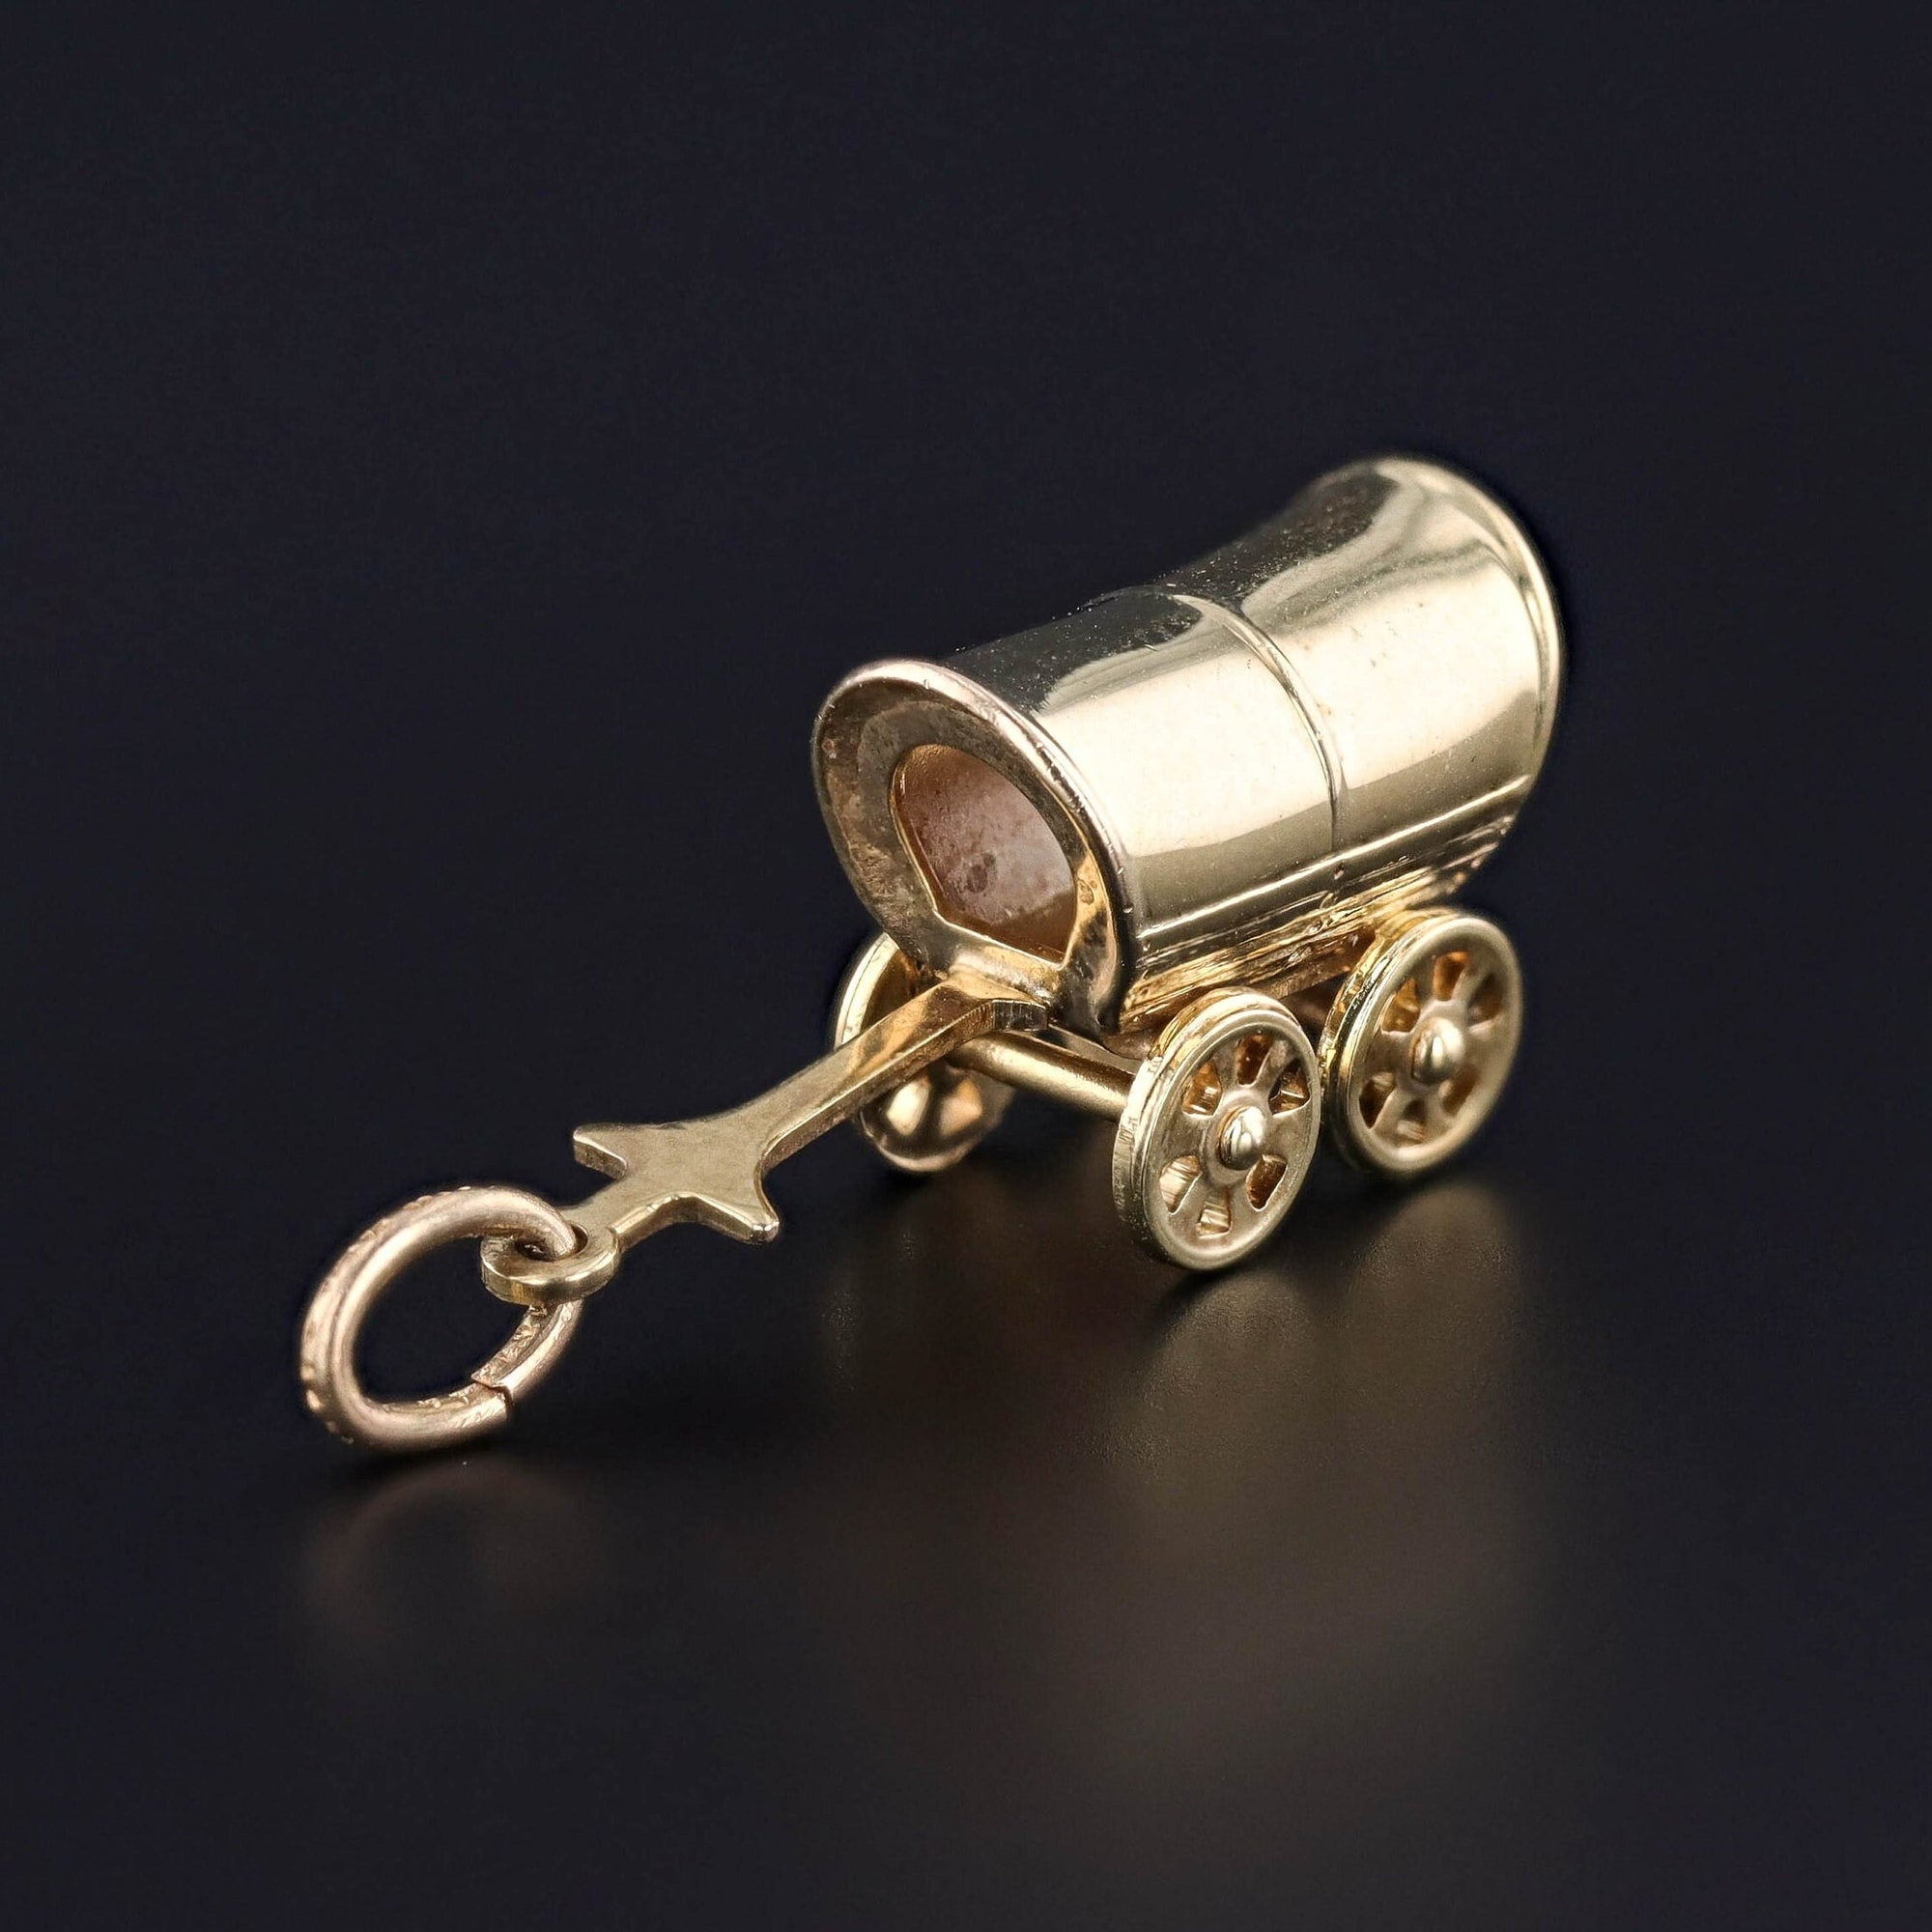 Vintage Covered Wagon Charm of 14k Gold